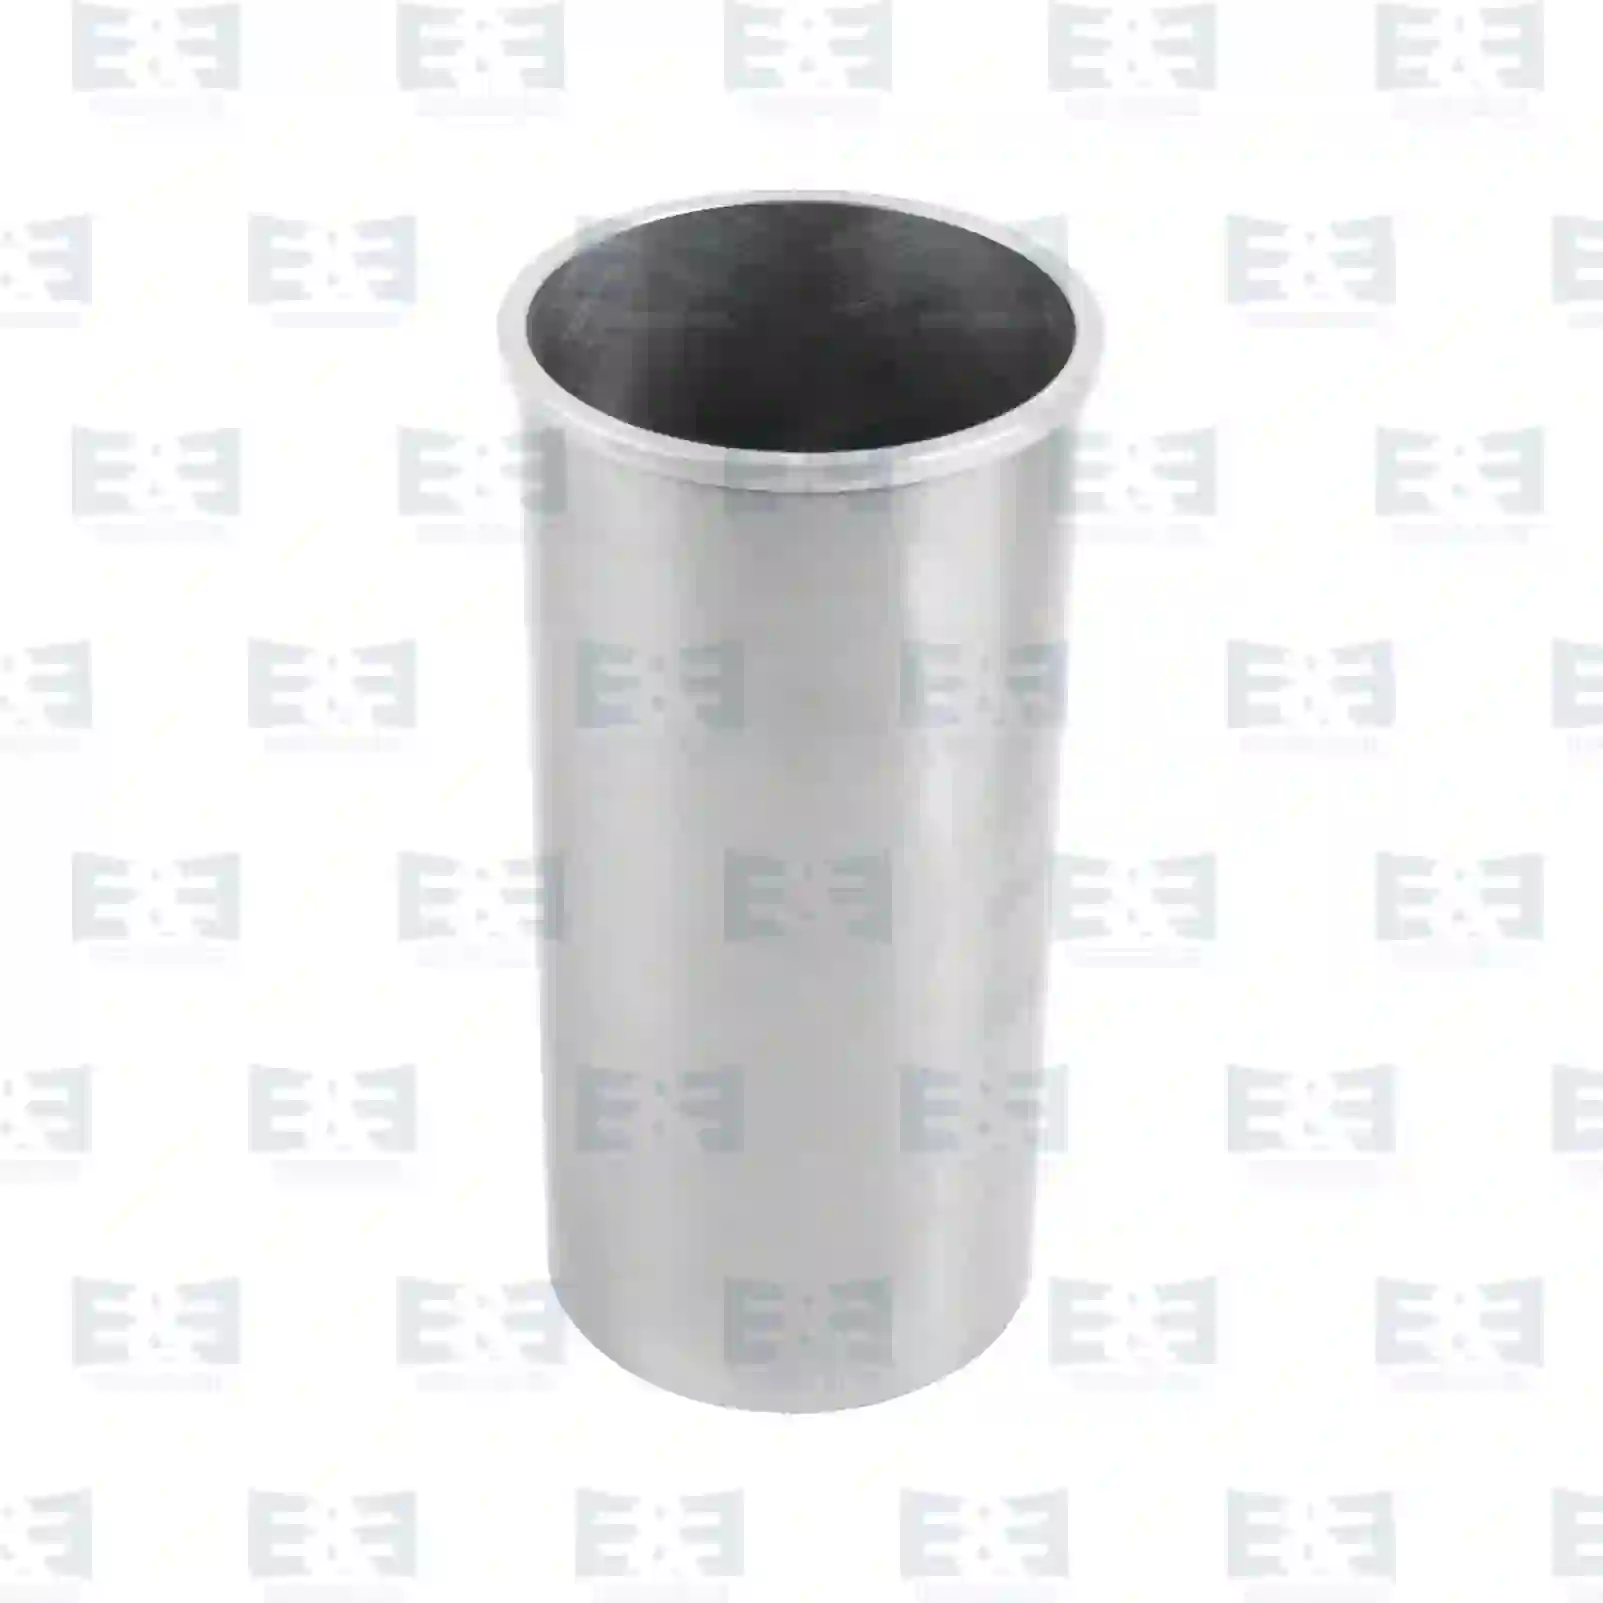 Cylinder liner, without seal rings, 2E2208220, 1298412, 1340541, 1622357, 1699332, ZG01084-0008 ||  2E2208220 E&E Truck Spare Parts | Truck Spare Parts, Auotomotive Spare Parts Cylinder liner, without seal rings, 2E2208220, 1298412, 1340541, 1622357, 1699332, ZG01084-0008 ||  2E2208220 E&E Truck Spare Parts | Truck Spare Parts, Auotomotive Spare Parts